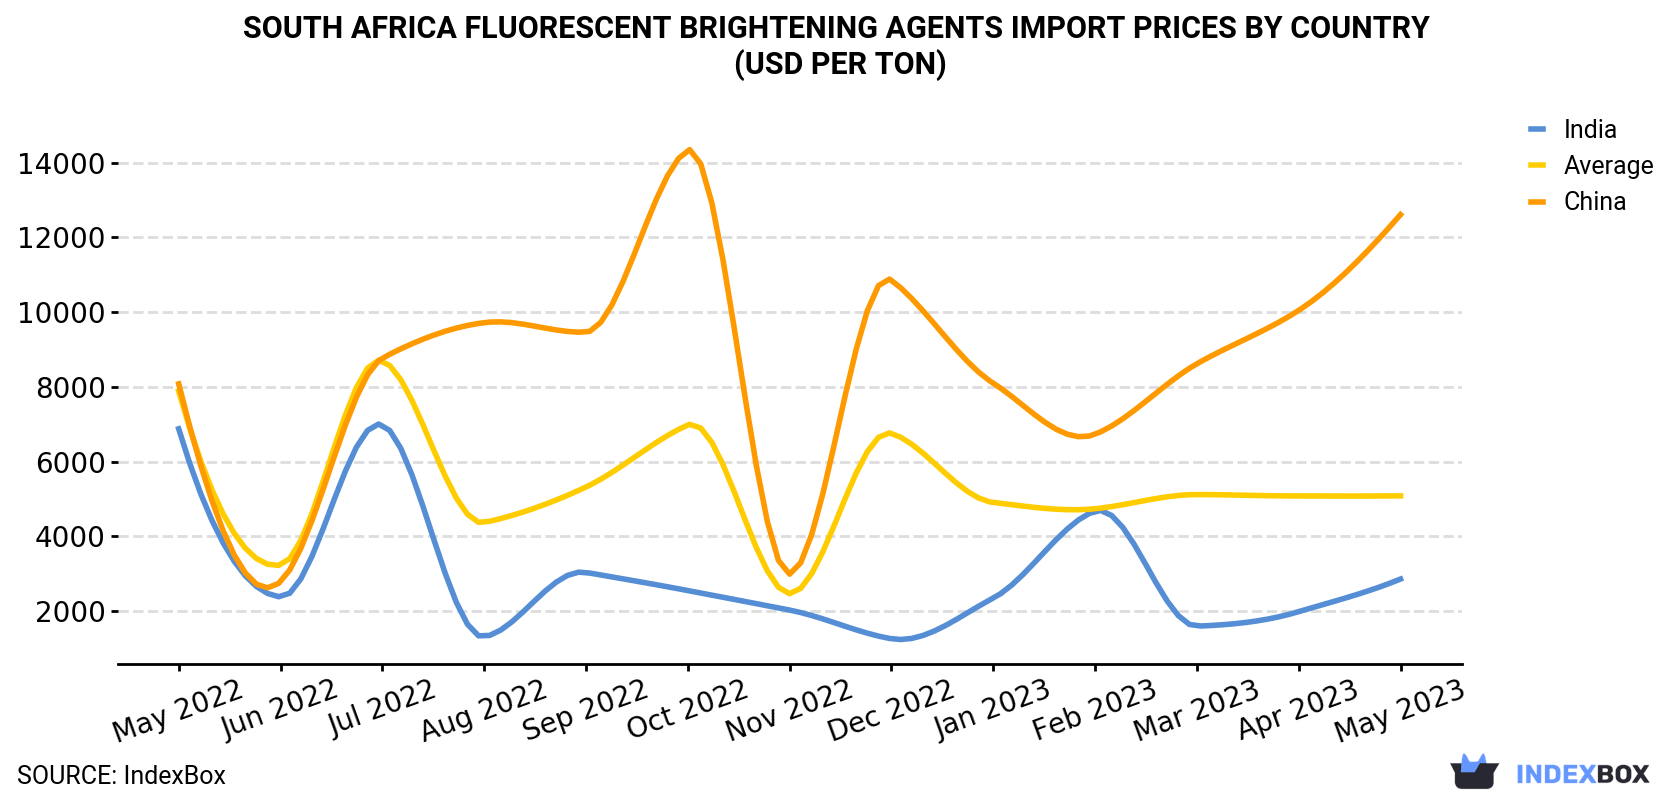 South Africa Fluorescent Brightening Agents Import Prices By Country (USD Per Ton)